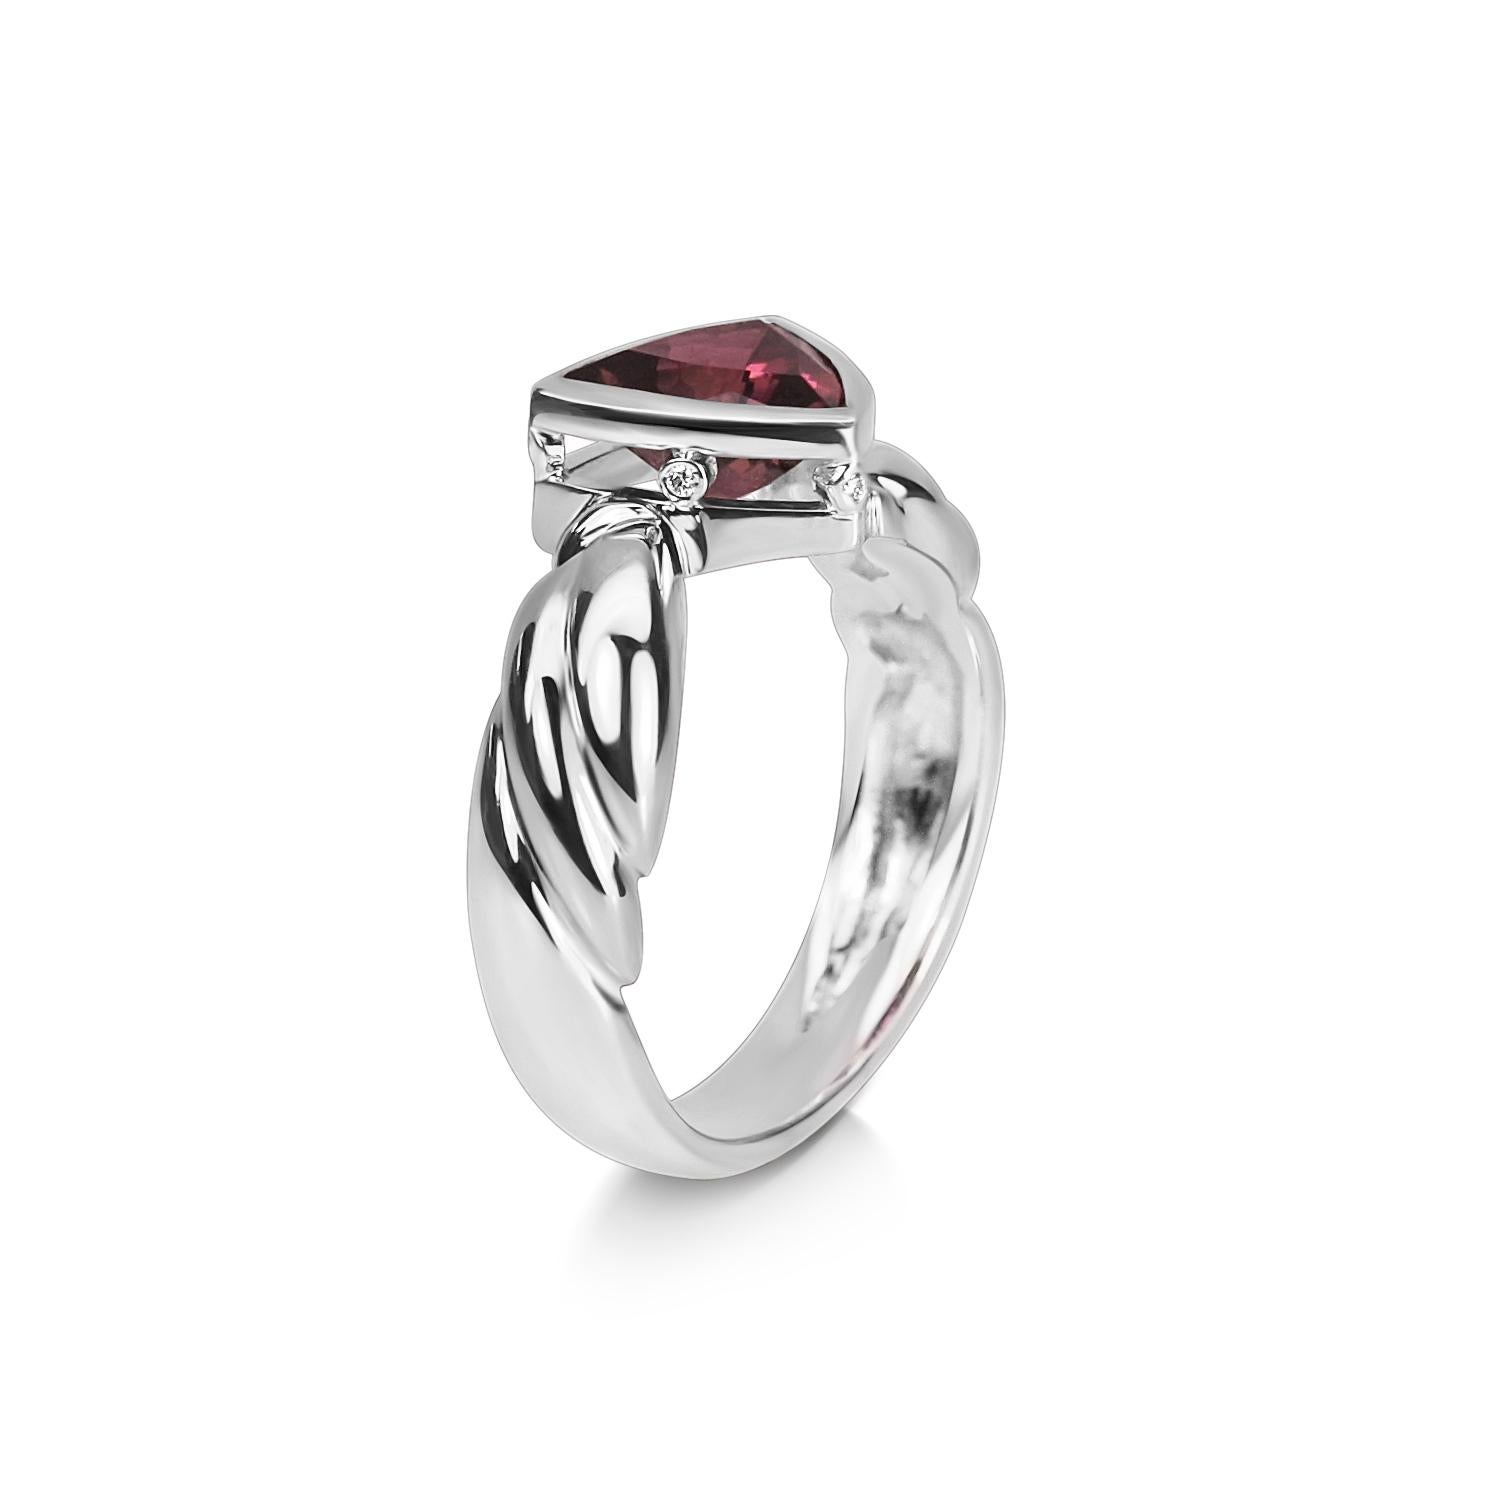 This trillion cut pink tourmaline ring is made in 18 karat White Gold with a carved style band. The pink tourmaline is a beautiful faceted deep smokey pink colour and is held in a rubover style setting. The setting has the extra detail of small